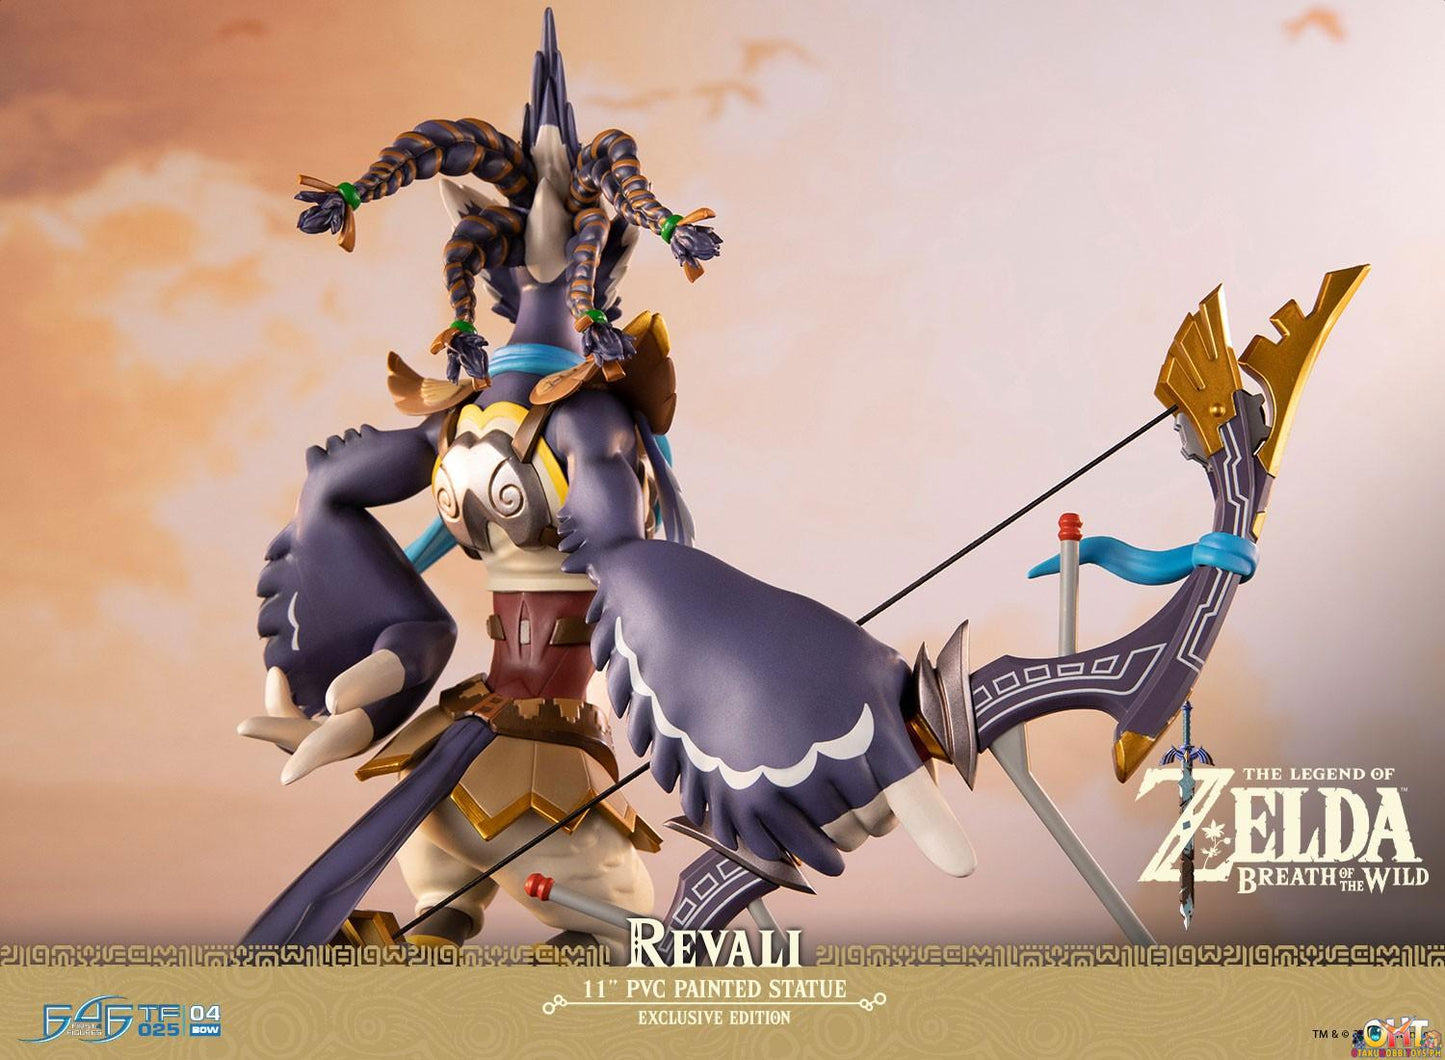 First 4 Figures The Legend of Zelda™: Breath of the Wild Revali Exclusive Edition